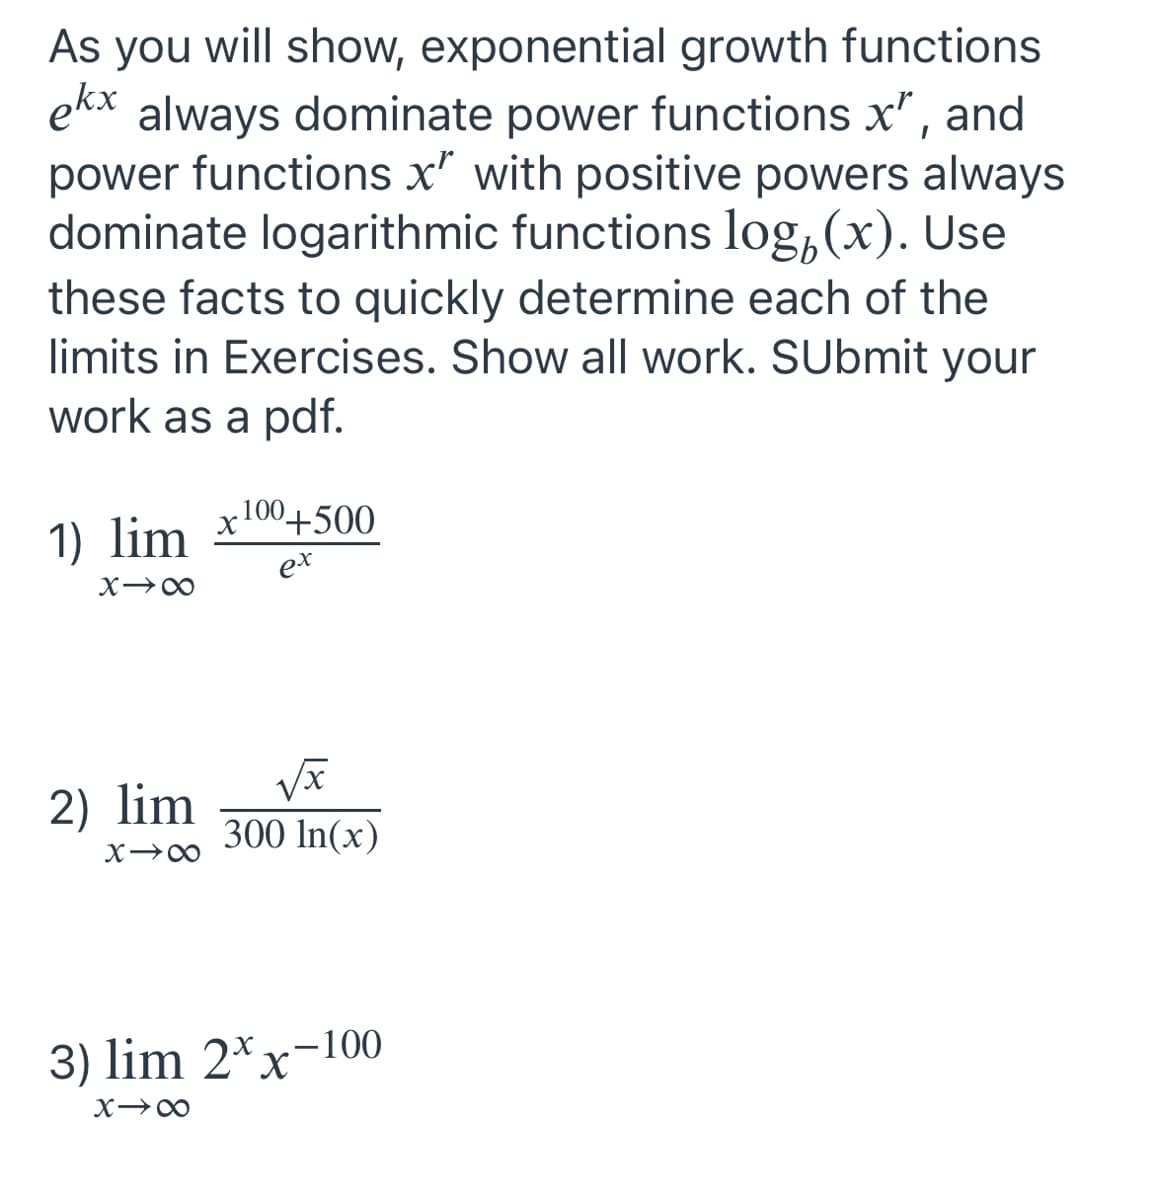 As you will show, exponential growth functions
ekx
always dominate power functions x", and
power functions x' with positive powers always
dominate logarithmic functions log, (x). Use
these facts to quickly determine each of the
limits in Exercises. Show all work. SUbmit your
work as a pdf.
1) lim x100+500
ex
2) lim
300 In(x)
3) lim 2*x-100
